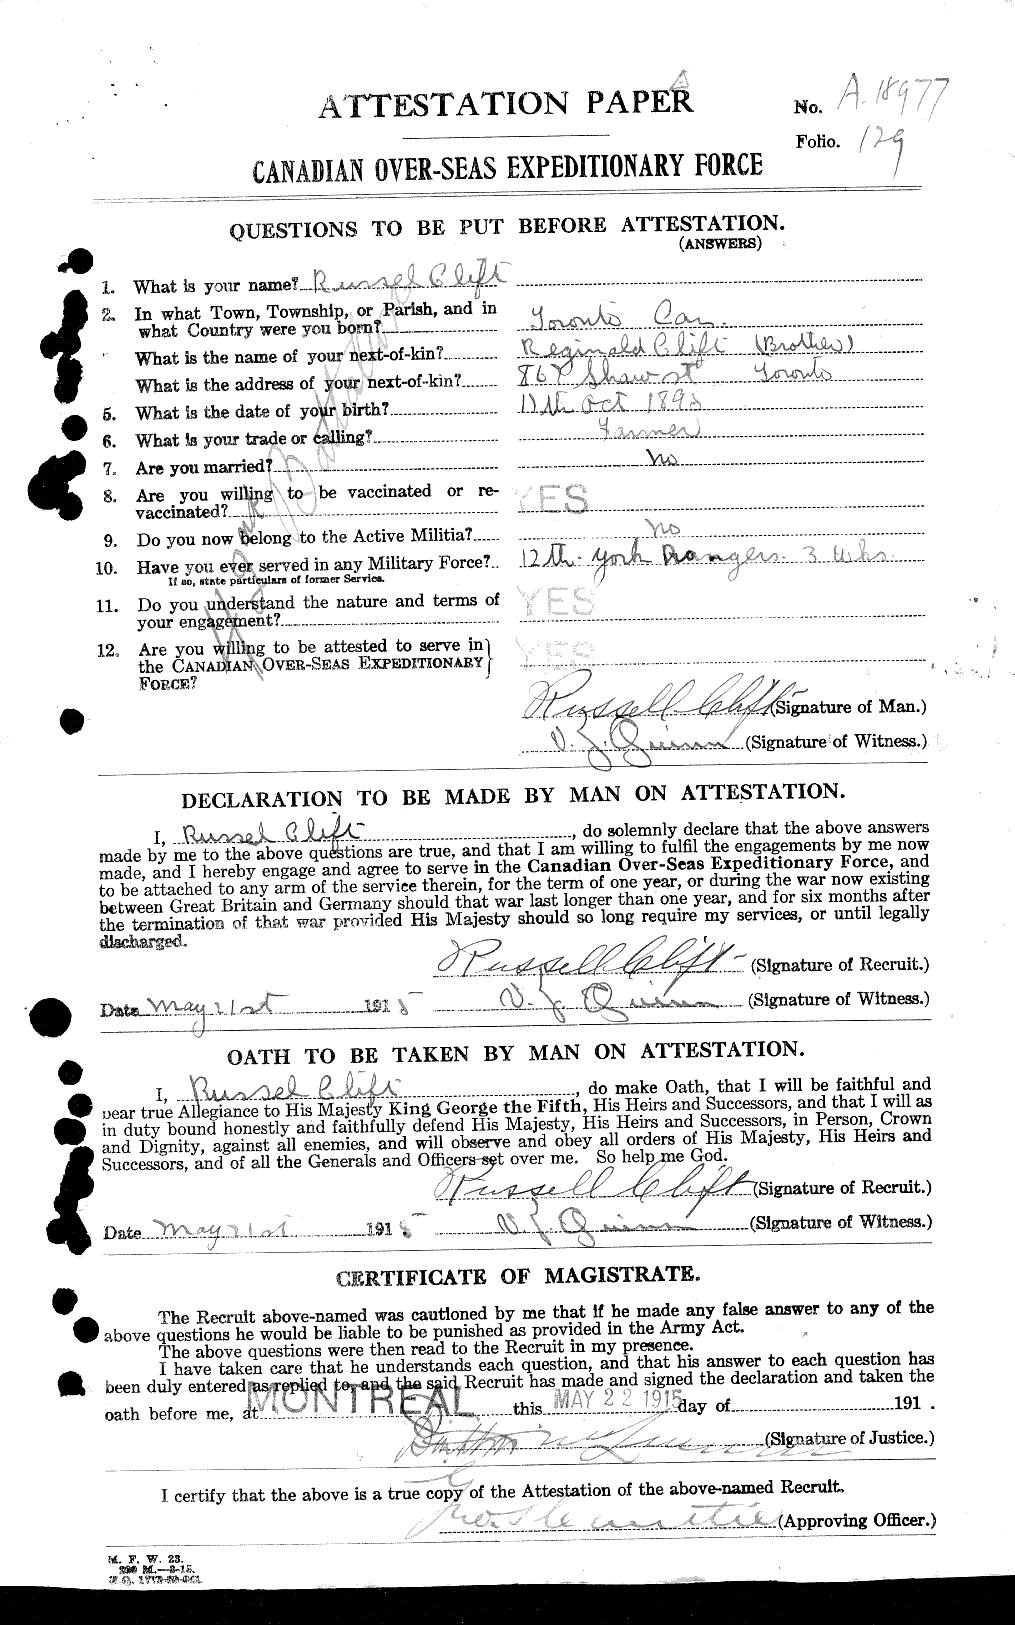 Personnel Records of the First World War - CEF 025325a